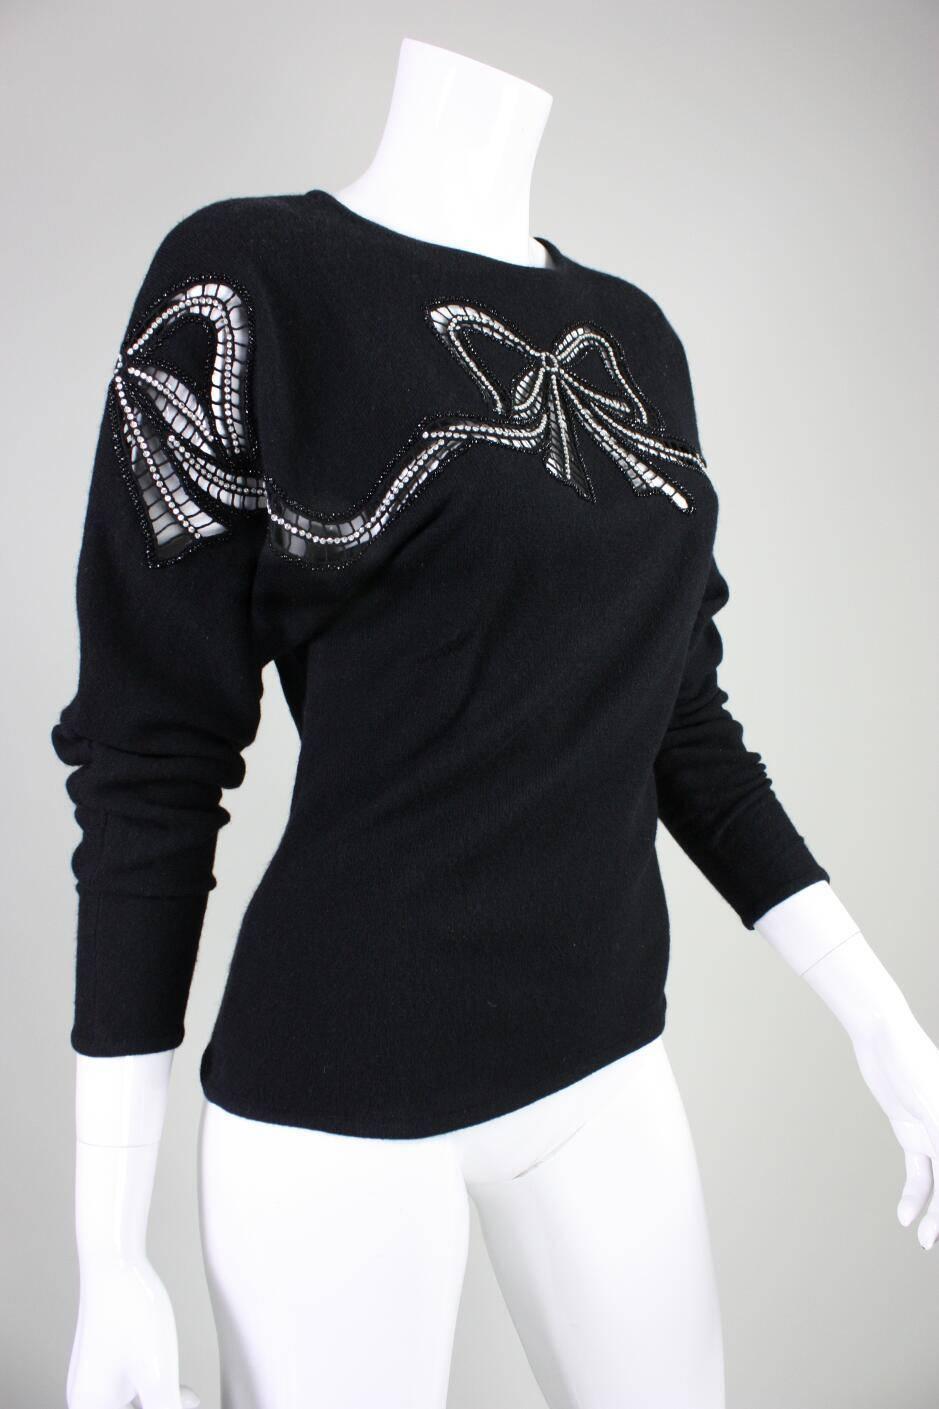 Vintage sweater dates to the 1980's and is an unlabeled Valentino that retailed at Amen Wardy. It is made of soft black wool with large openwork bows that extend from the front and around the shoulders to the back. Cutouts are accented with black